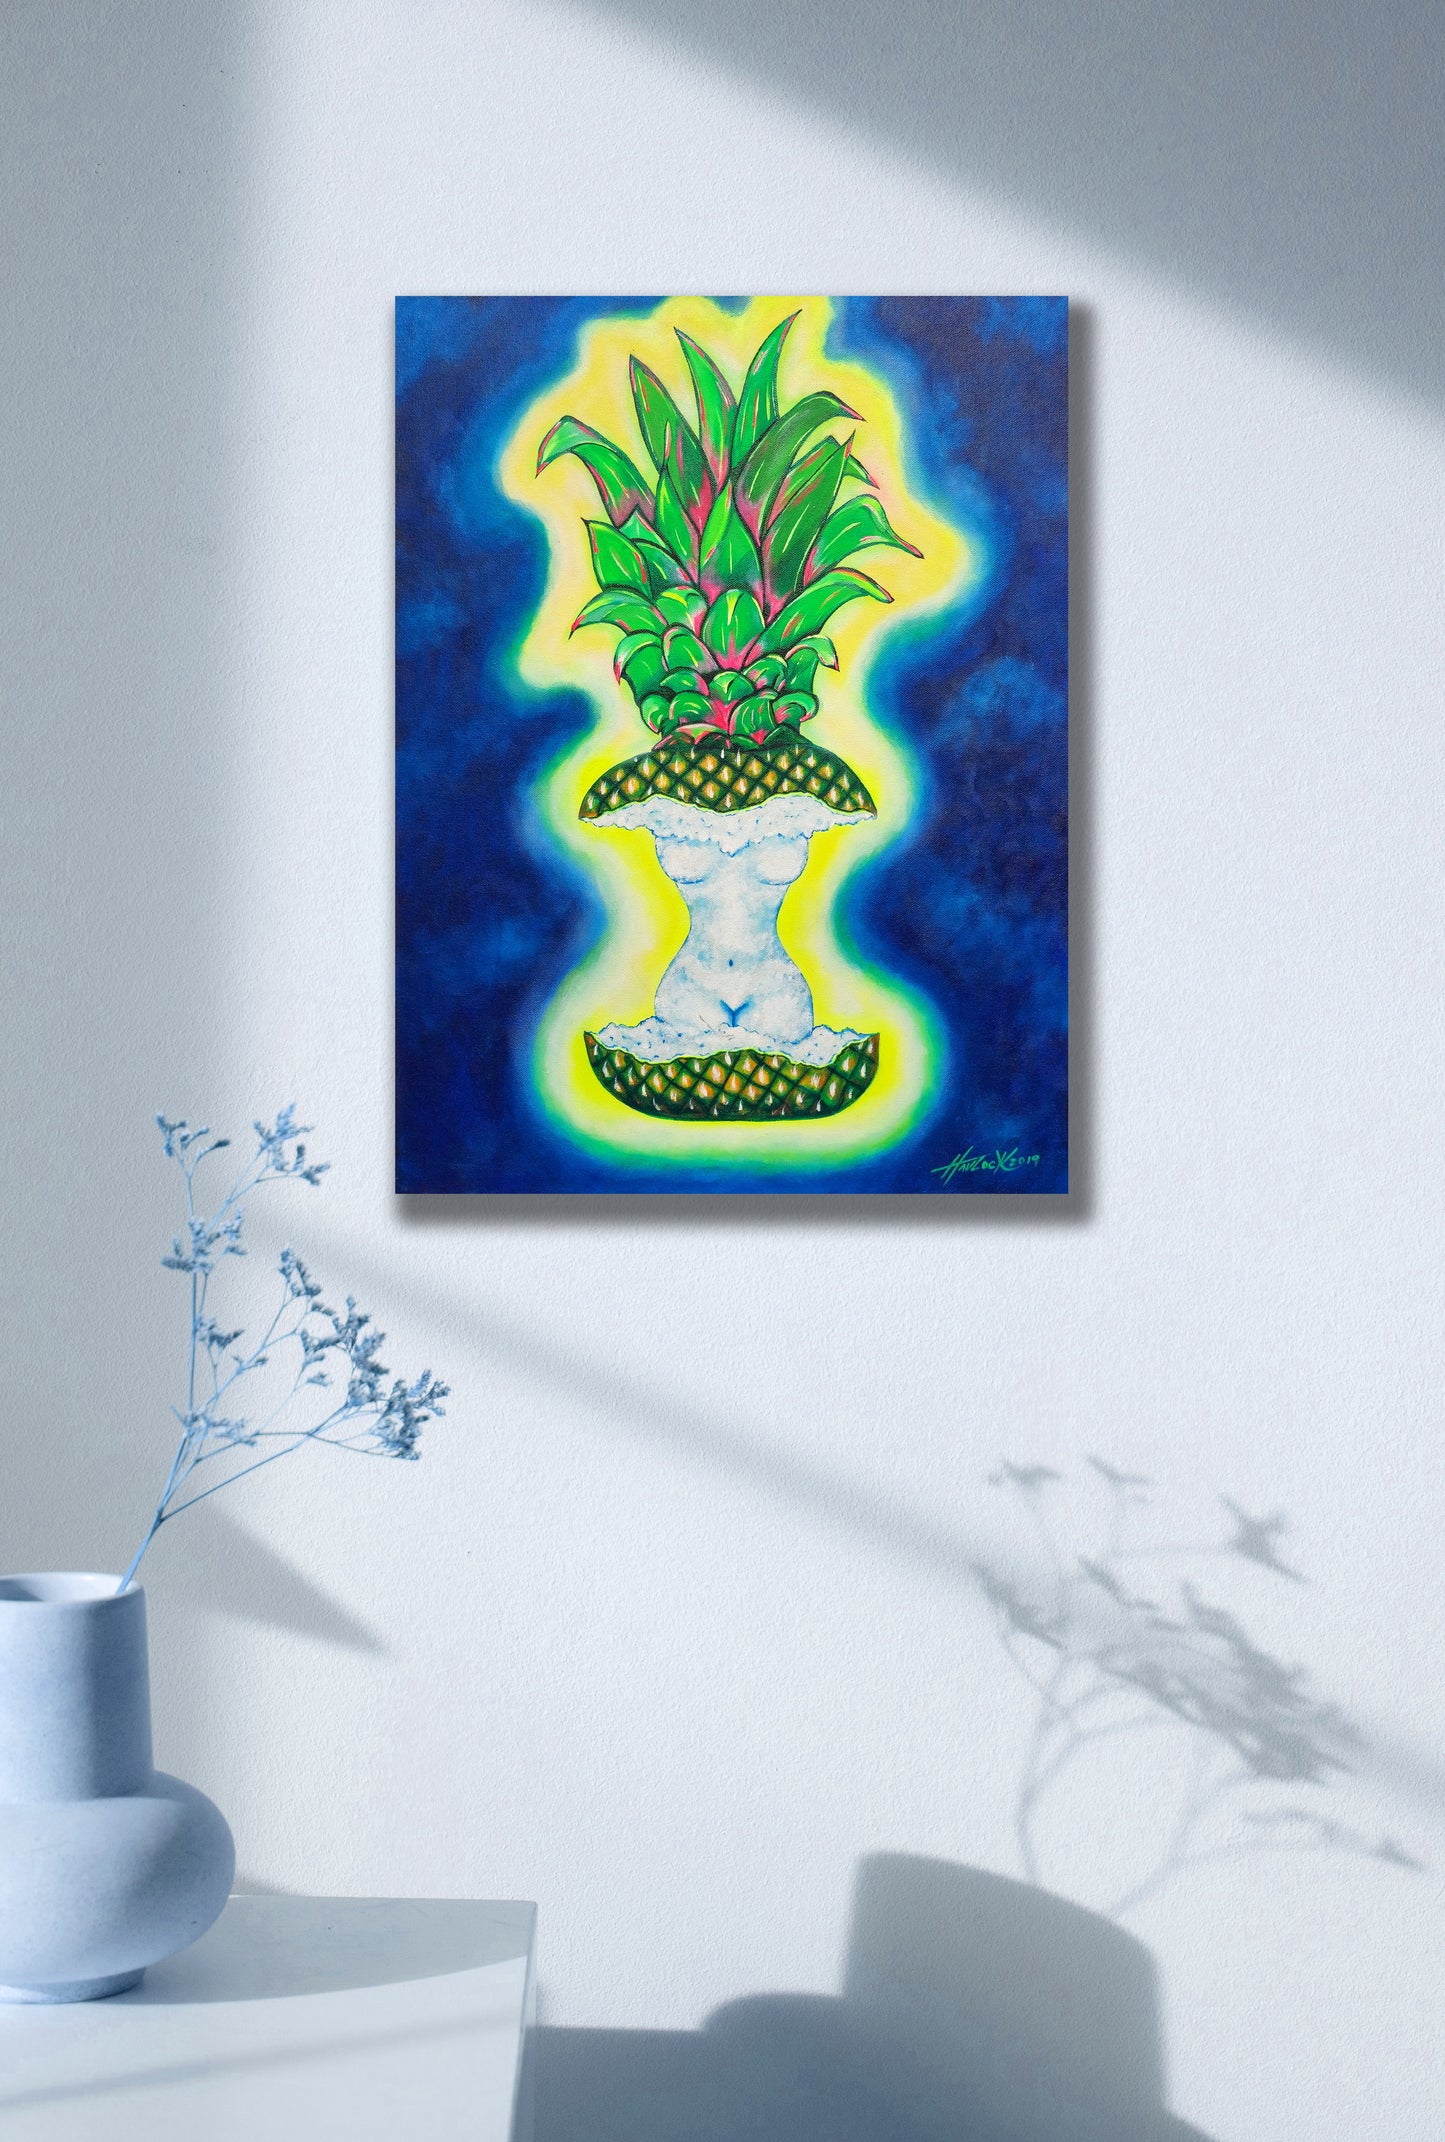 PINA - Metal Print, Limited Edition 9" x 12" - GARDEN OF EVE - Surrealism by Joey Havlock